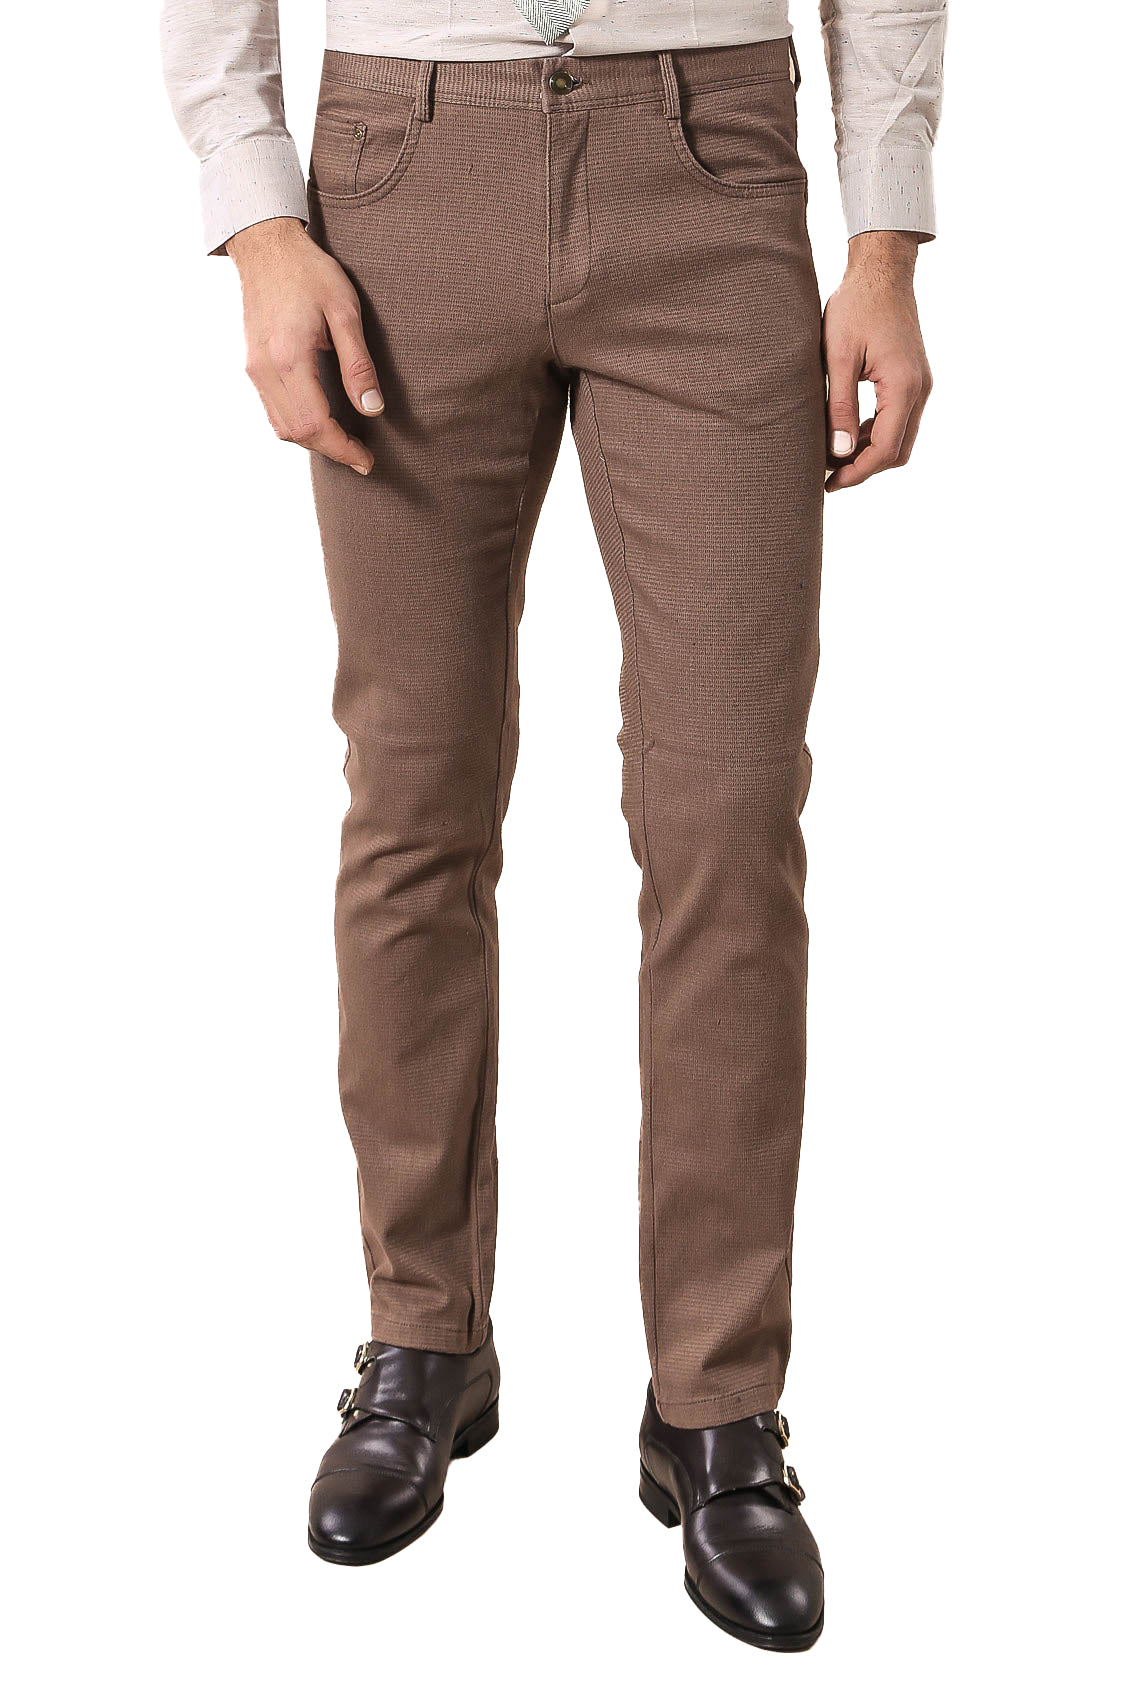 Cotton Pants For Boys - Light Brown in Tirupur at best price by S.B  Garments - Justdial